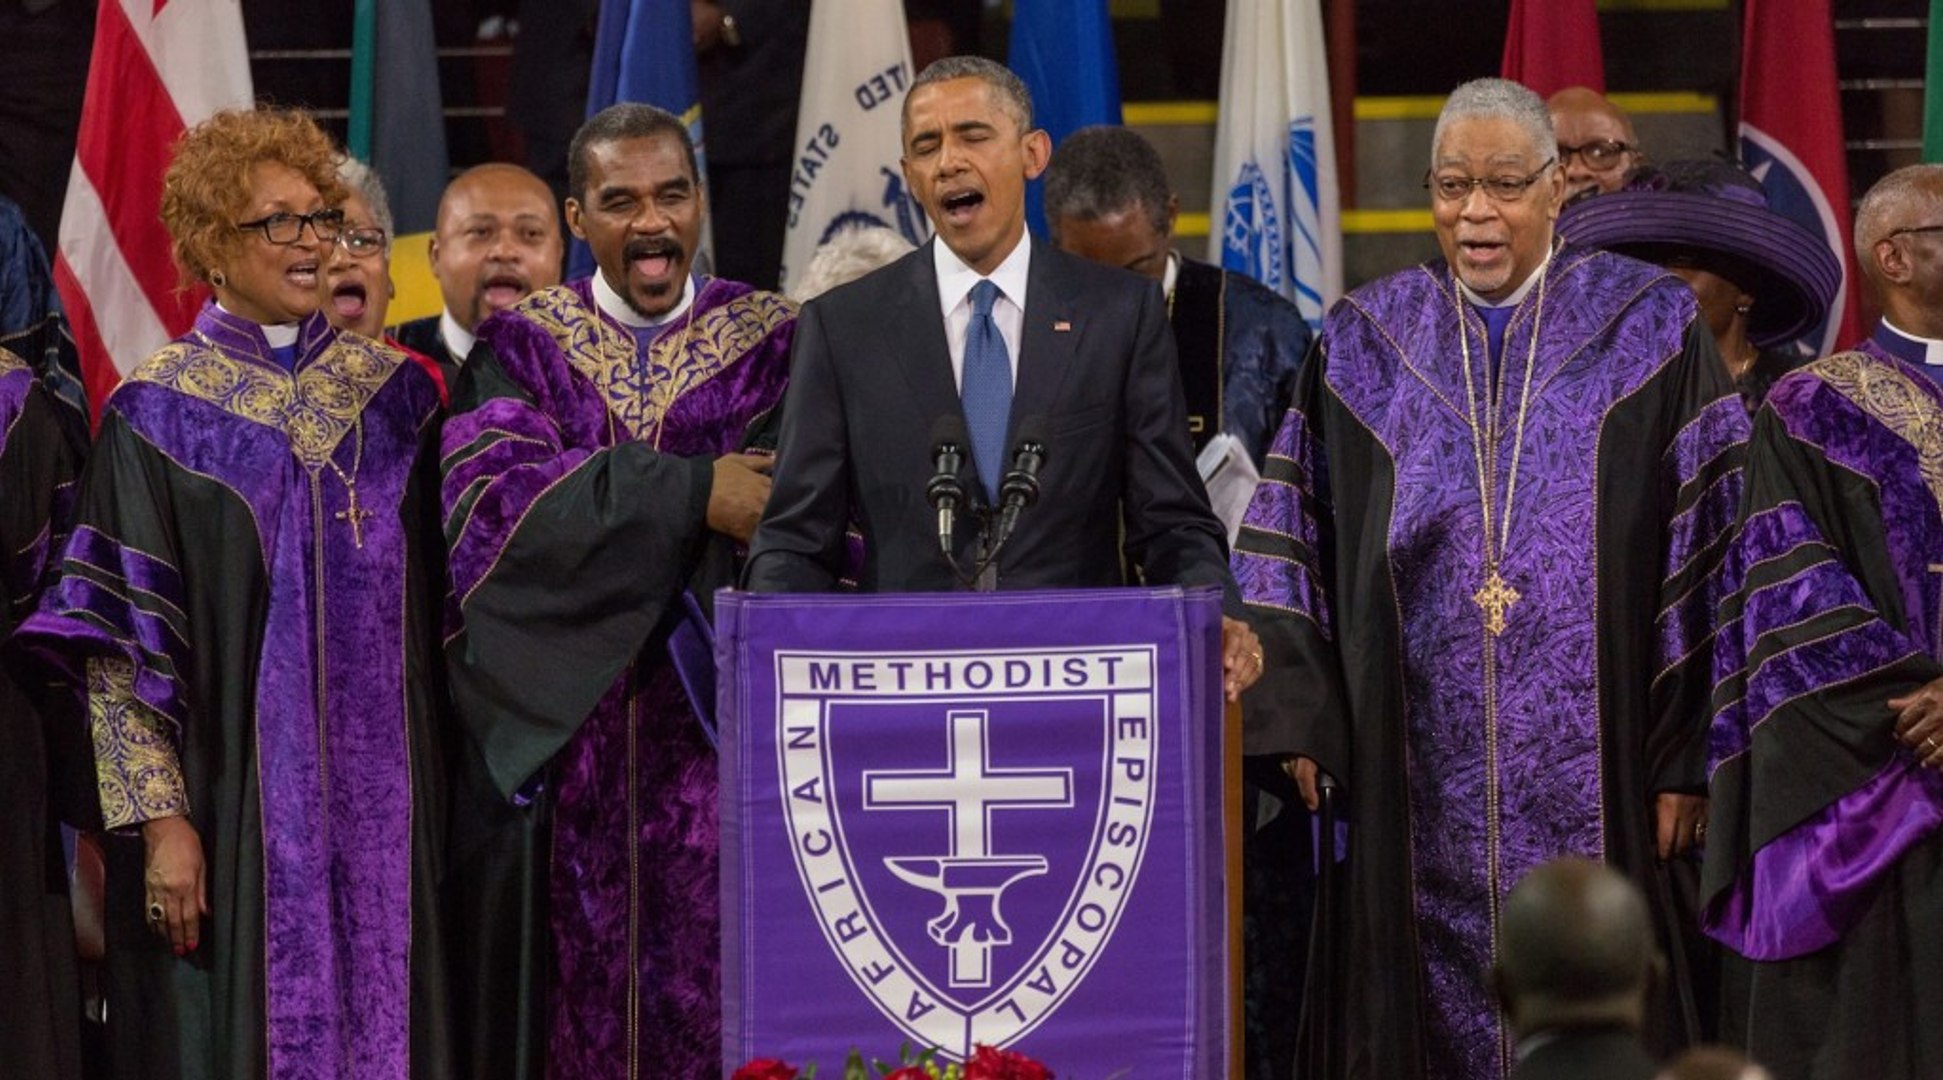 Obama Leads Church In Singing Amazing Grace